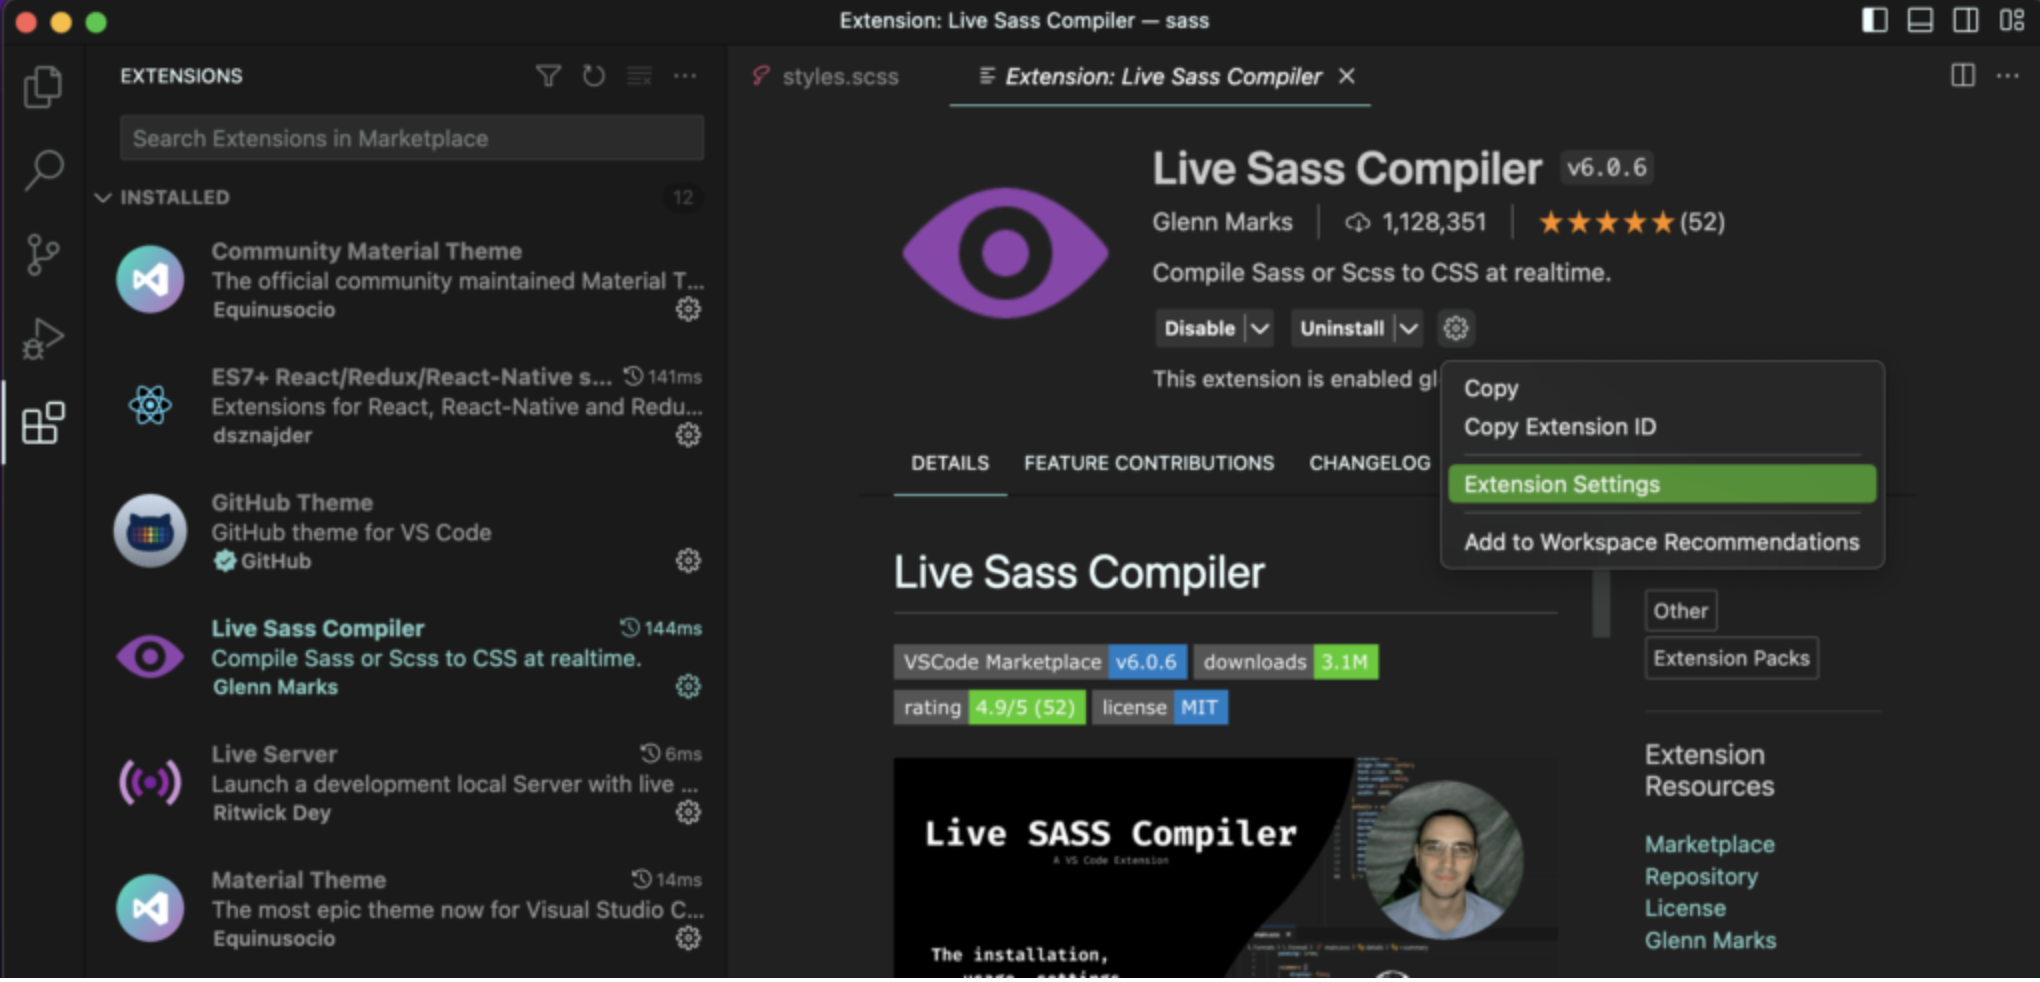 Open The Live SASS Compiler Settings